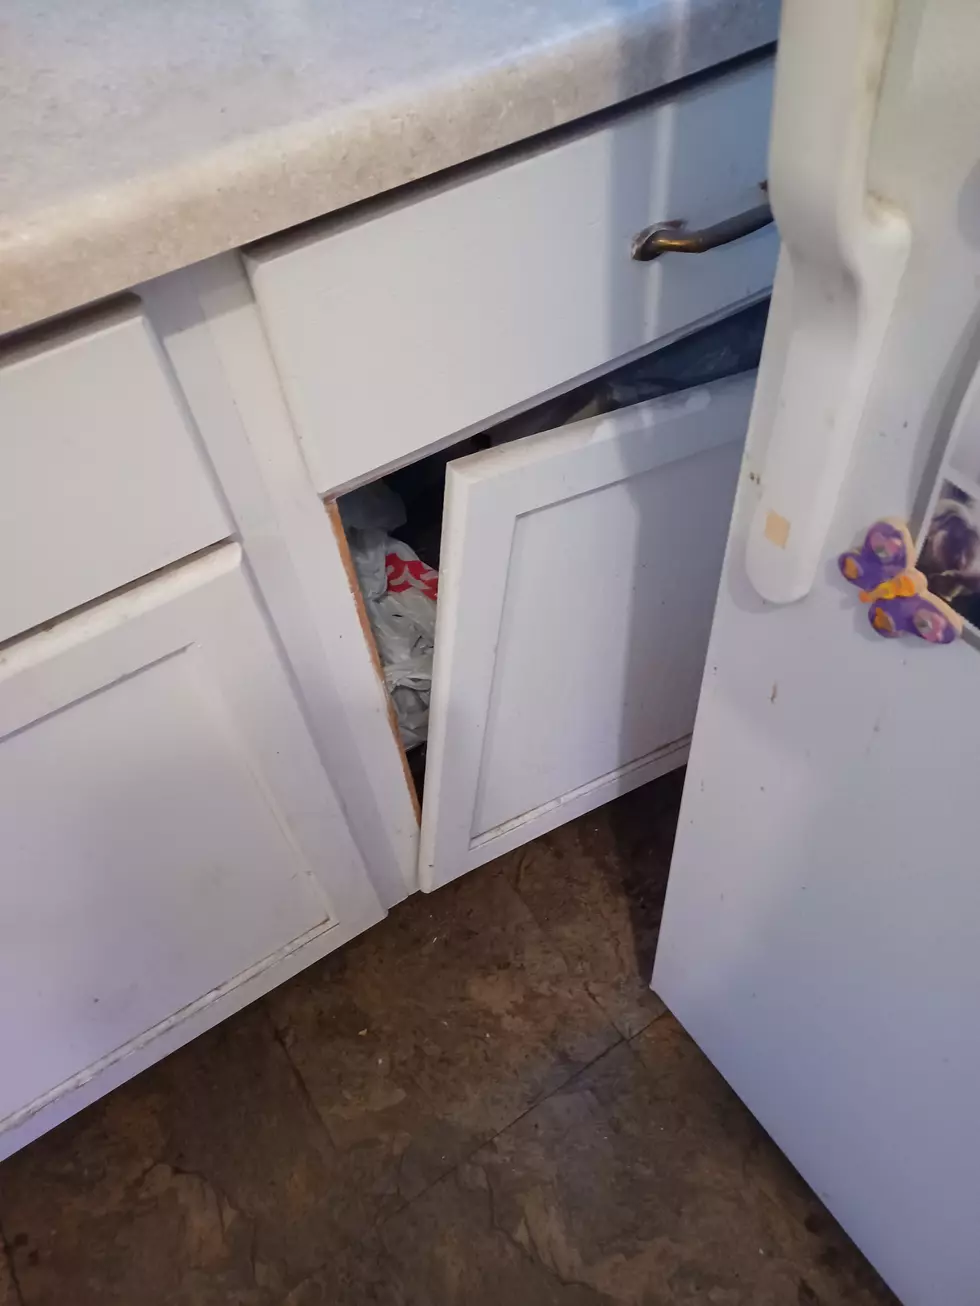 The Unsolved Mystery of The Rogue Kitchen Cabinet